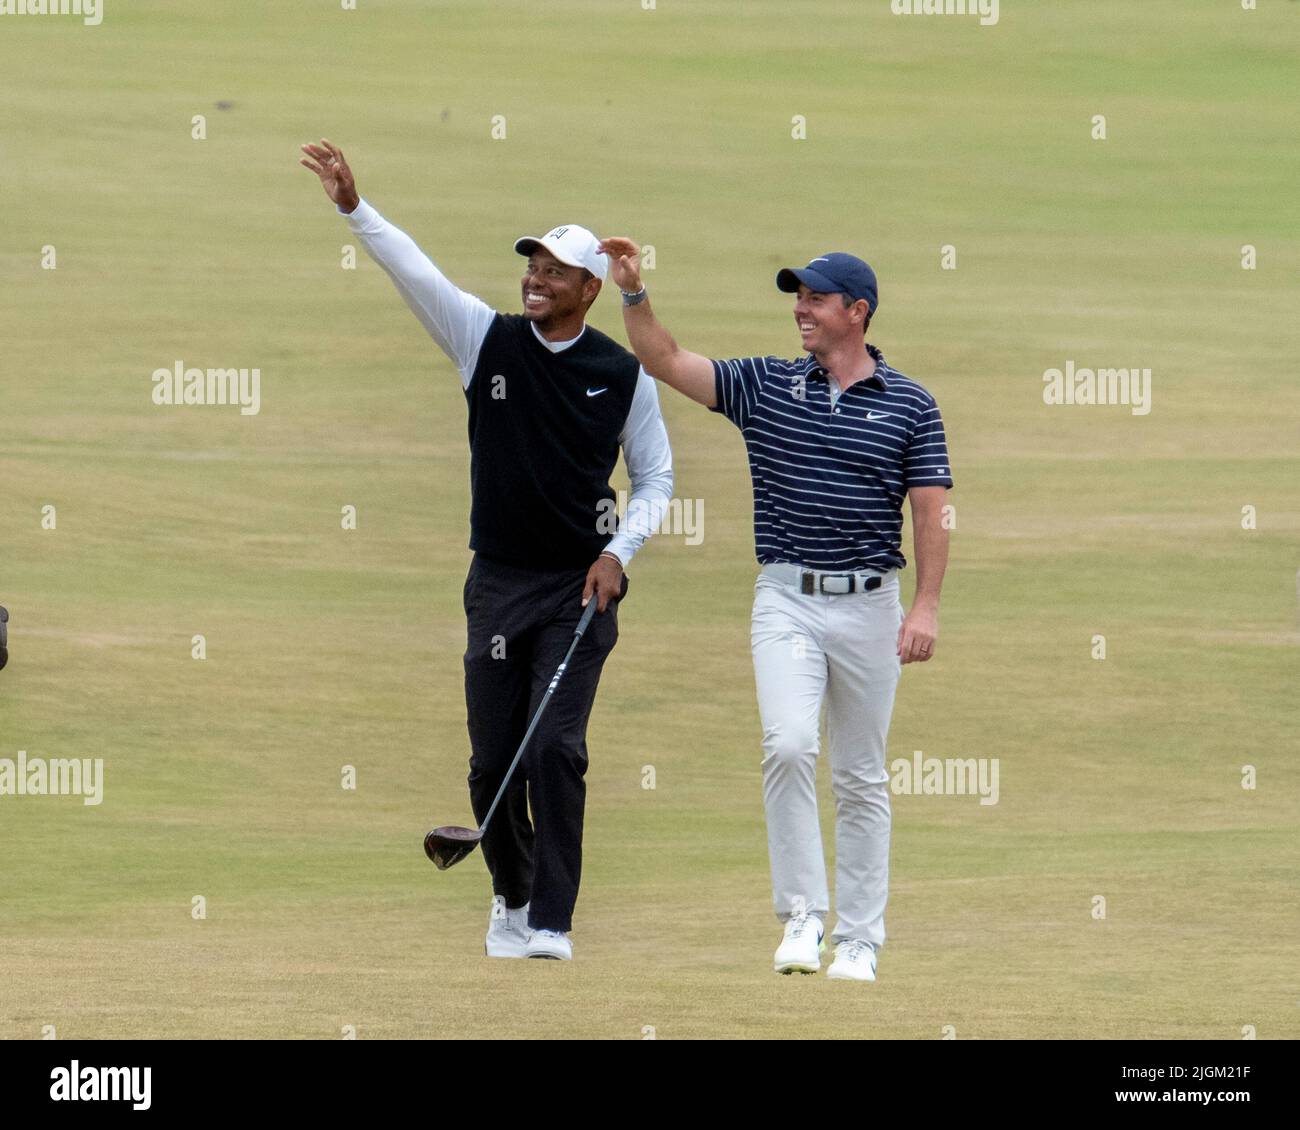 150th Open Golf Championships, St Andrews, July 11th 2022  Tiger Woods (left) and Rory McIlroy wave to  the houses as they walk up the 18th fairway during the R&A's Celebration of Champions challenge at the Old Course, St Andrews, Scotland. Credit: Ian Rutherford/Alamy Live News. Stock Photo